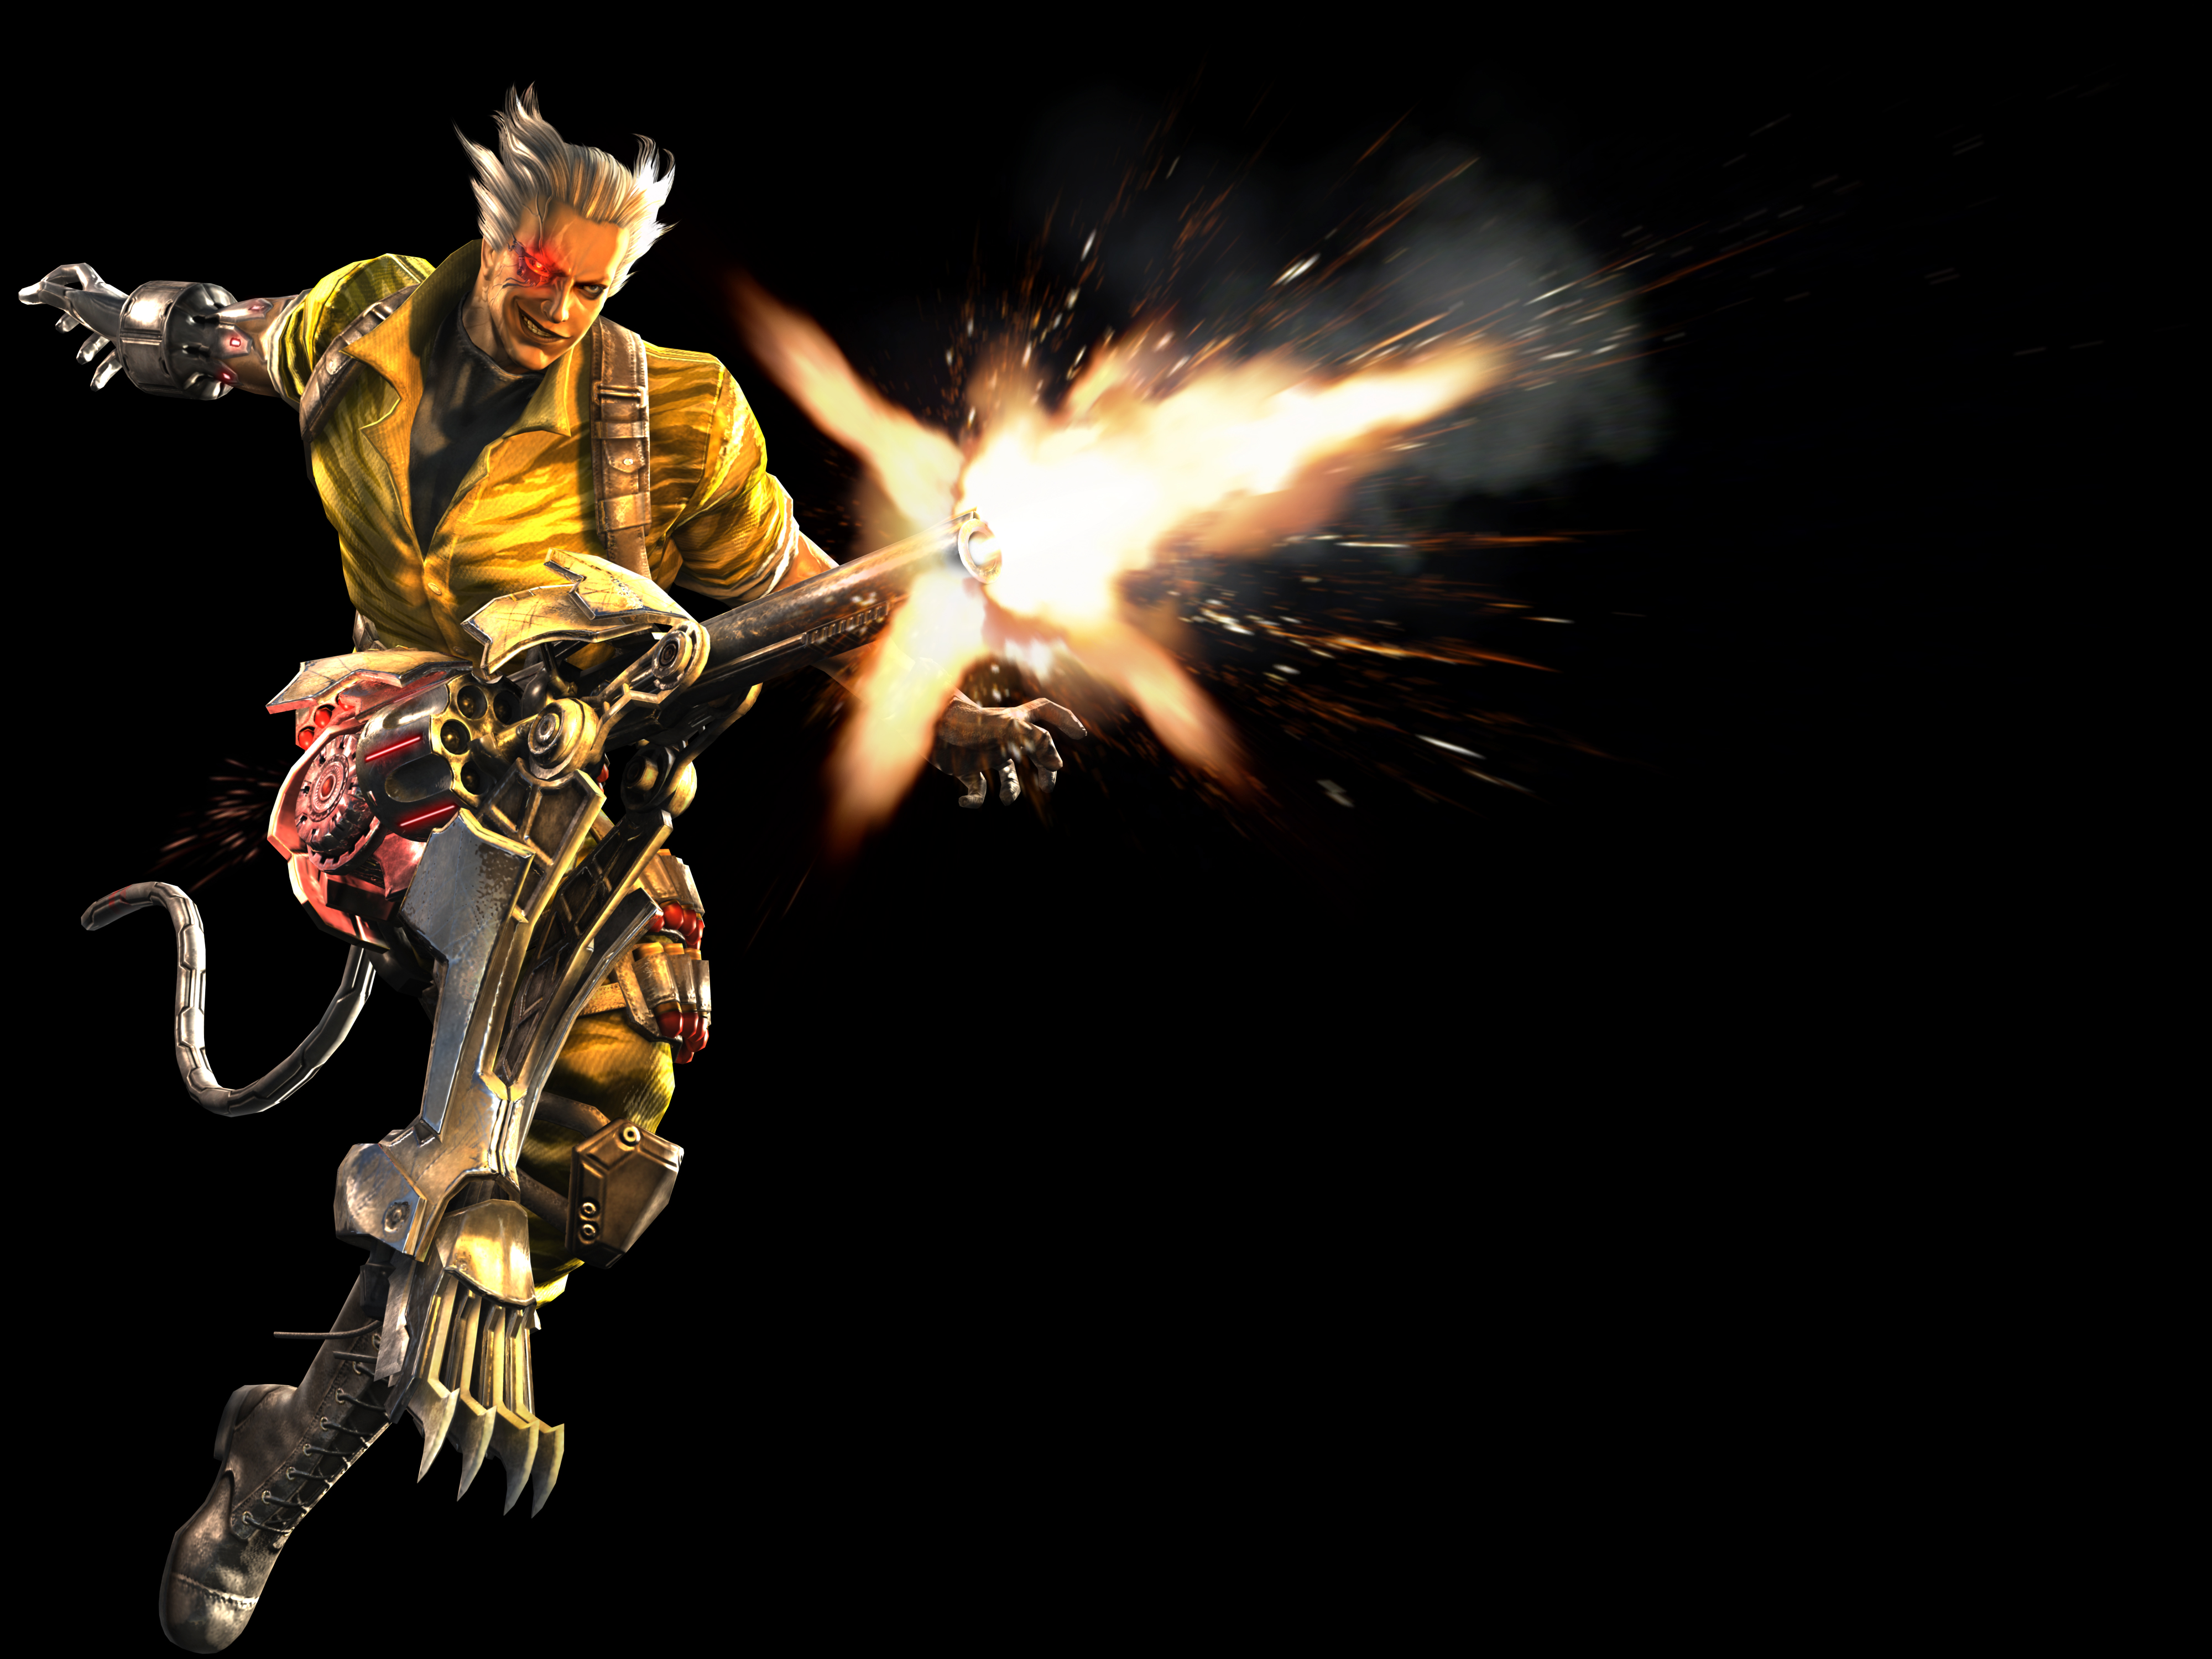 Anarchy Reigns Hd Wallpaper - Anarchy Reigns Durga , HD Wallpaper & Backgrounds